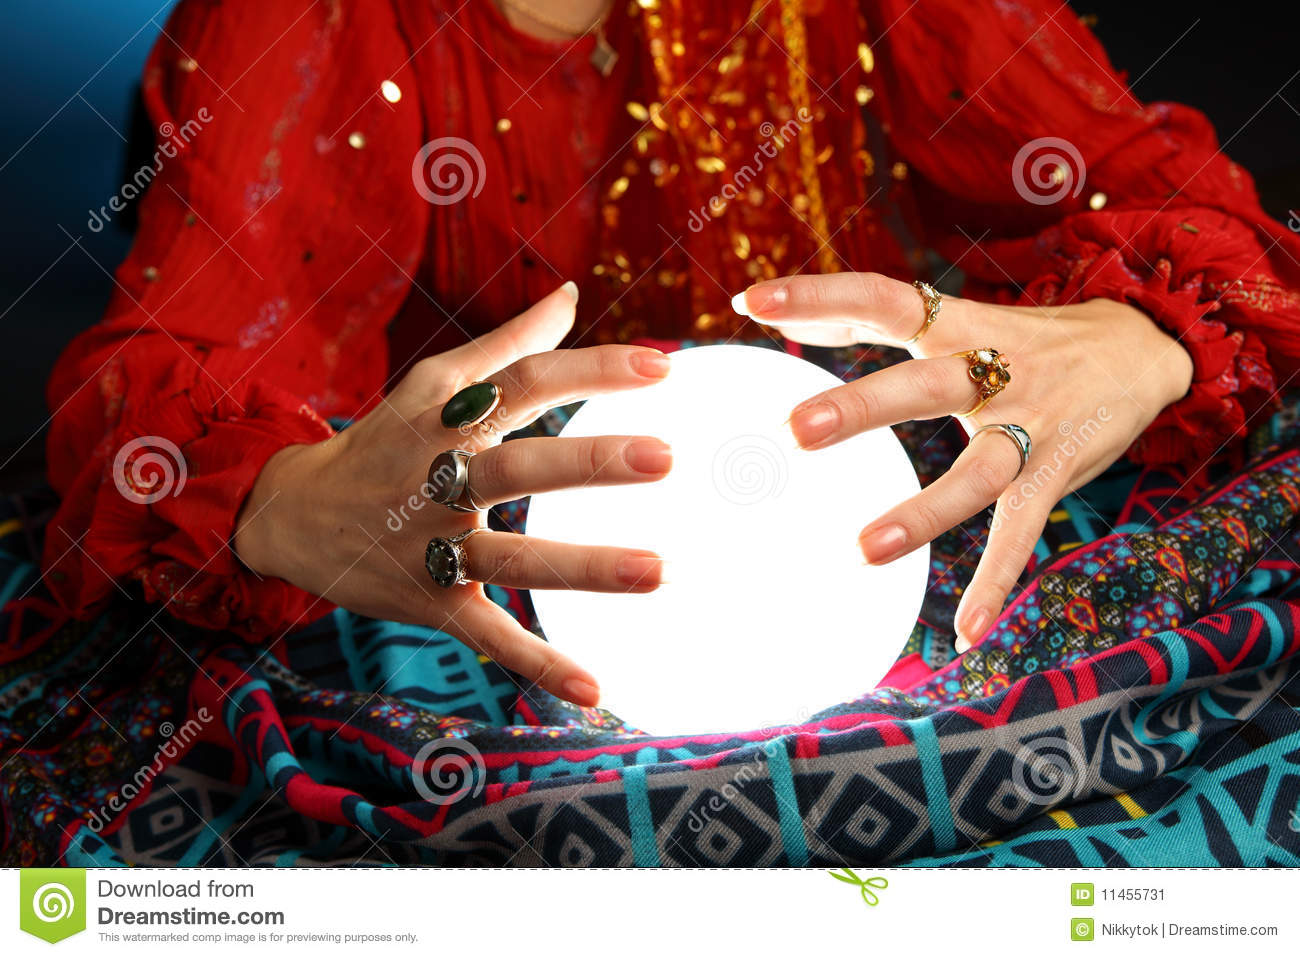 Hands Of A Fortune Teller Working With A Shining Crystal Ball